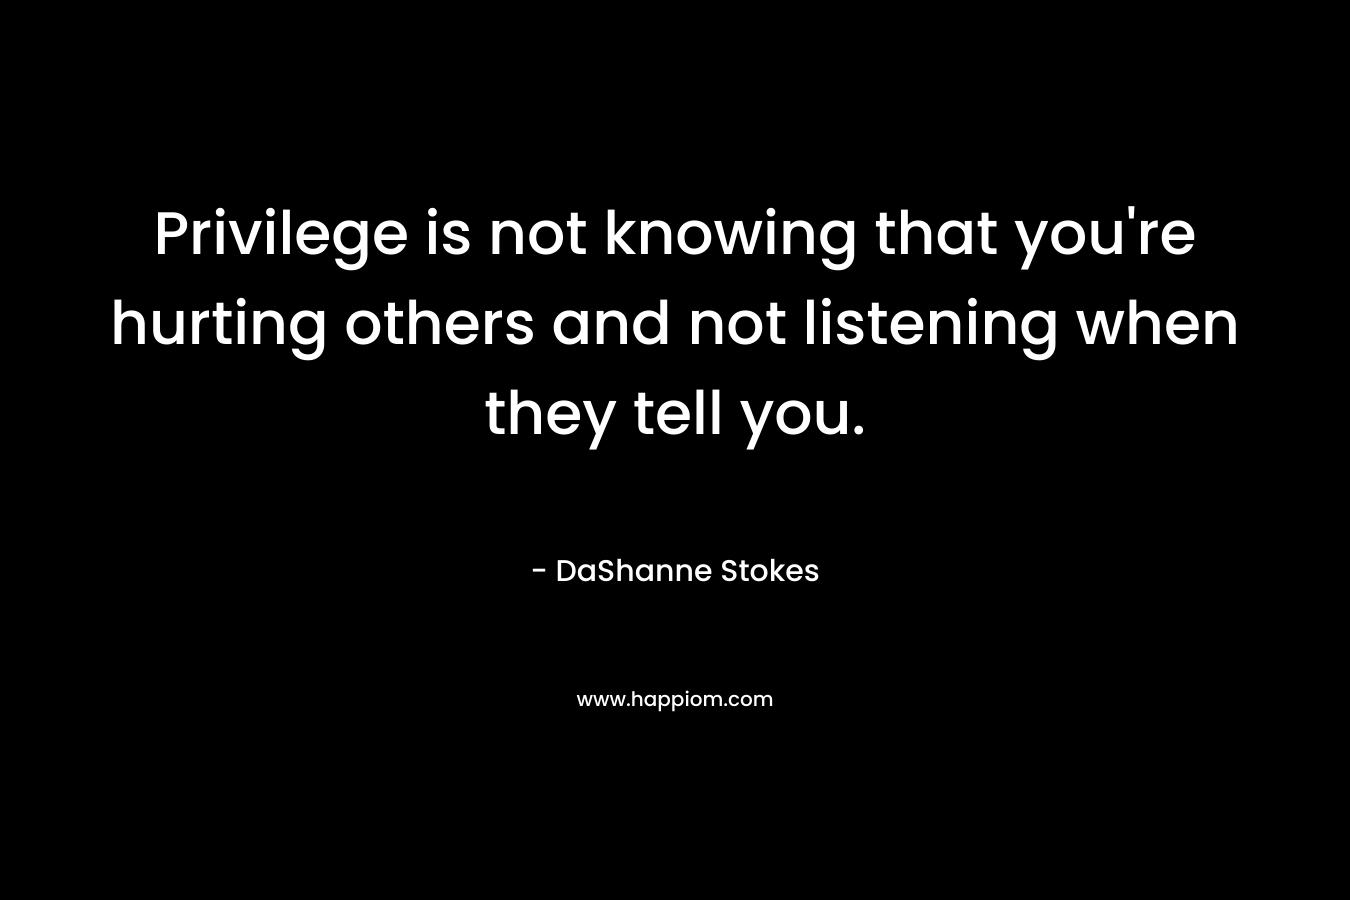 Privilege is not knowing that you're hurting others and not listening when they tell you.